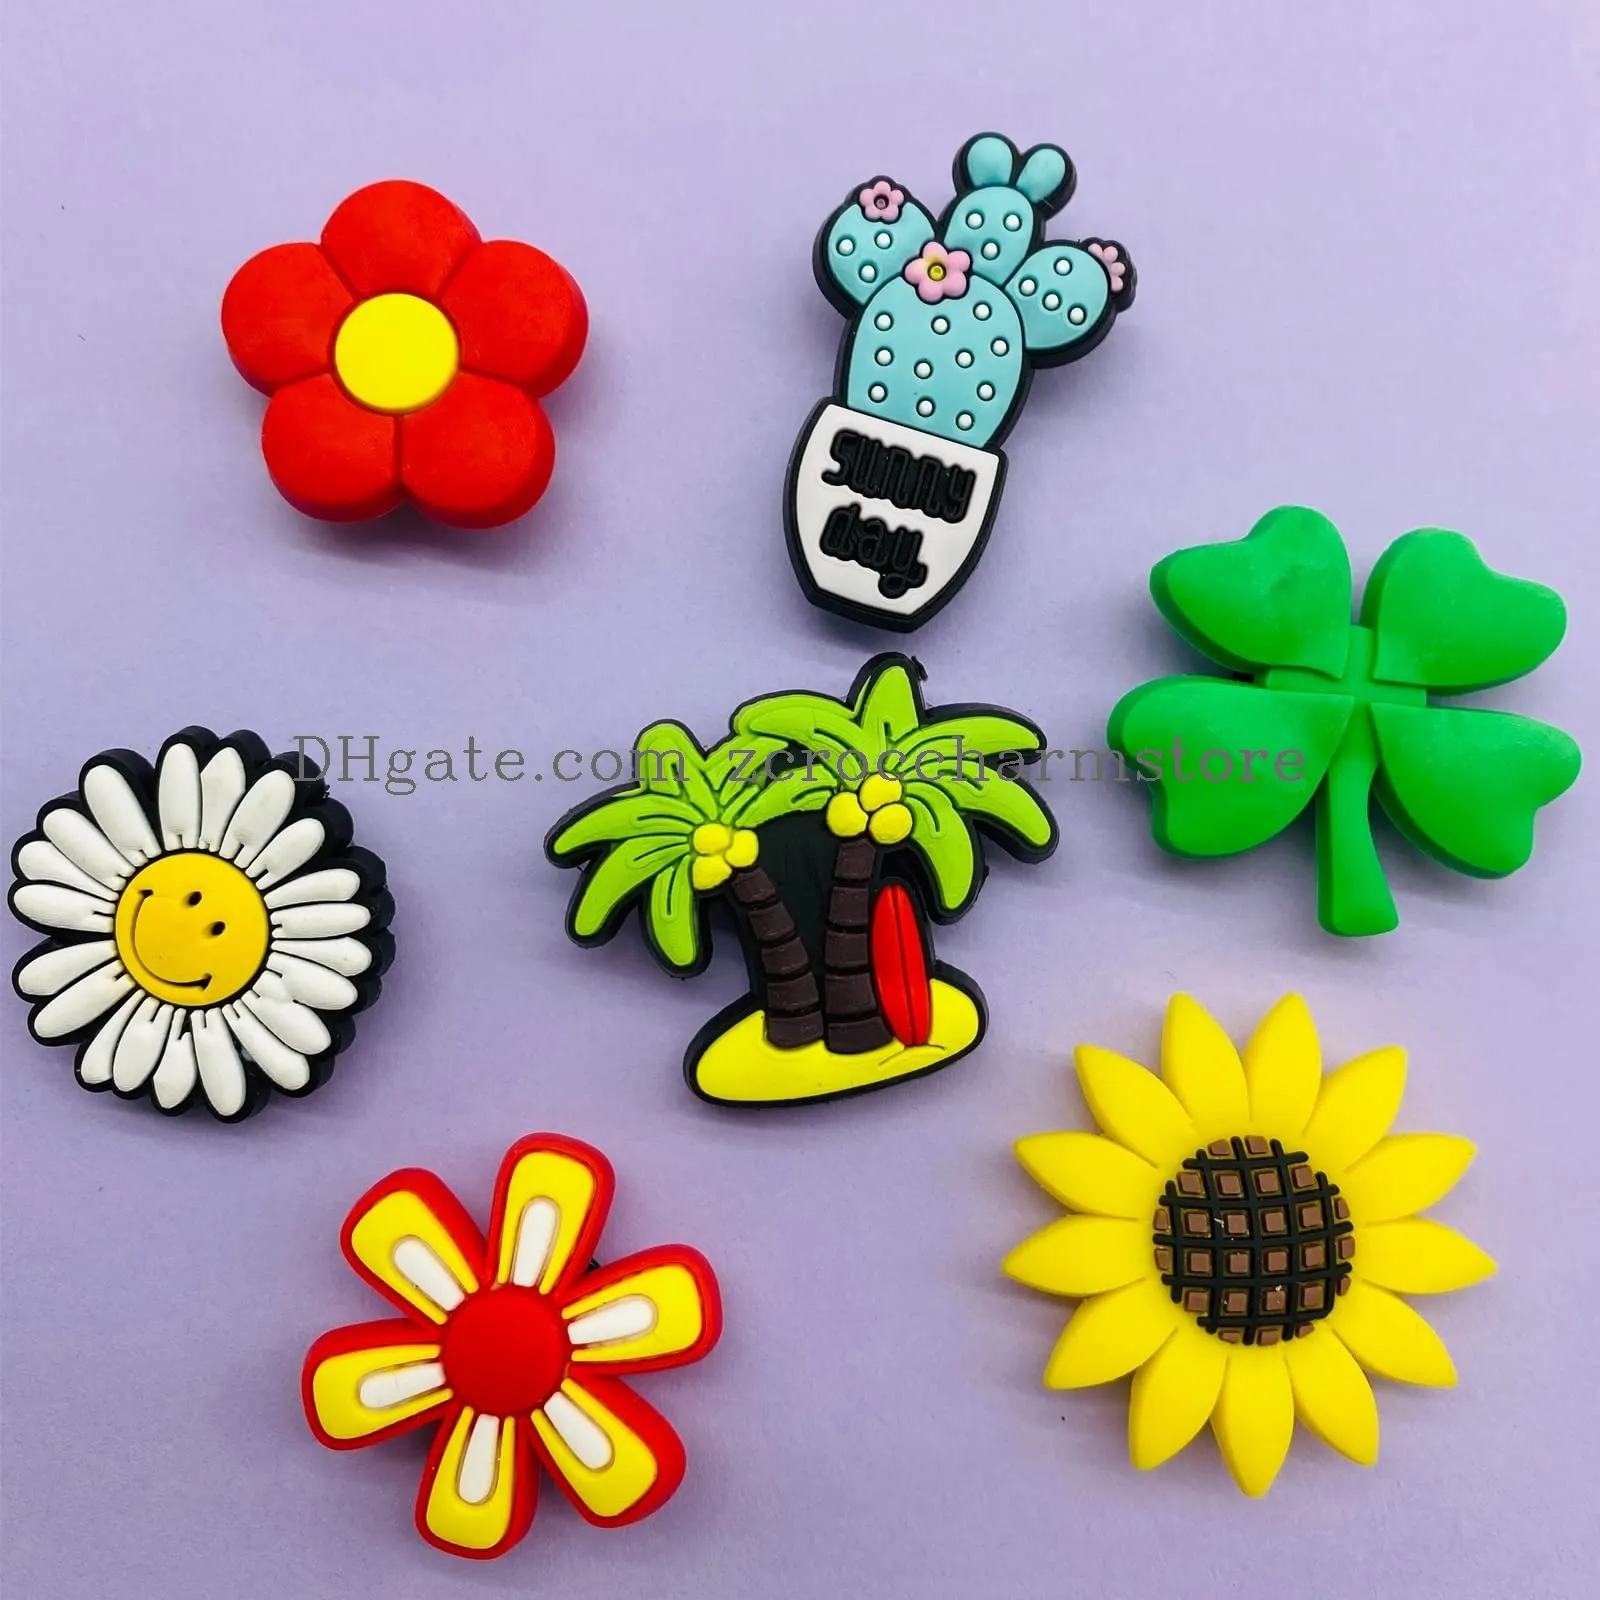 35 90 120 different cute pvc shoe charms for clog sandals bracelet coconut tree cactus butterfly flower shaped shoe decoration charms for summer beach party favors